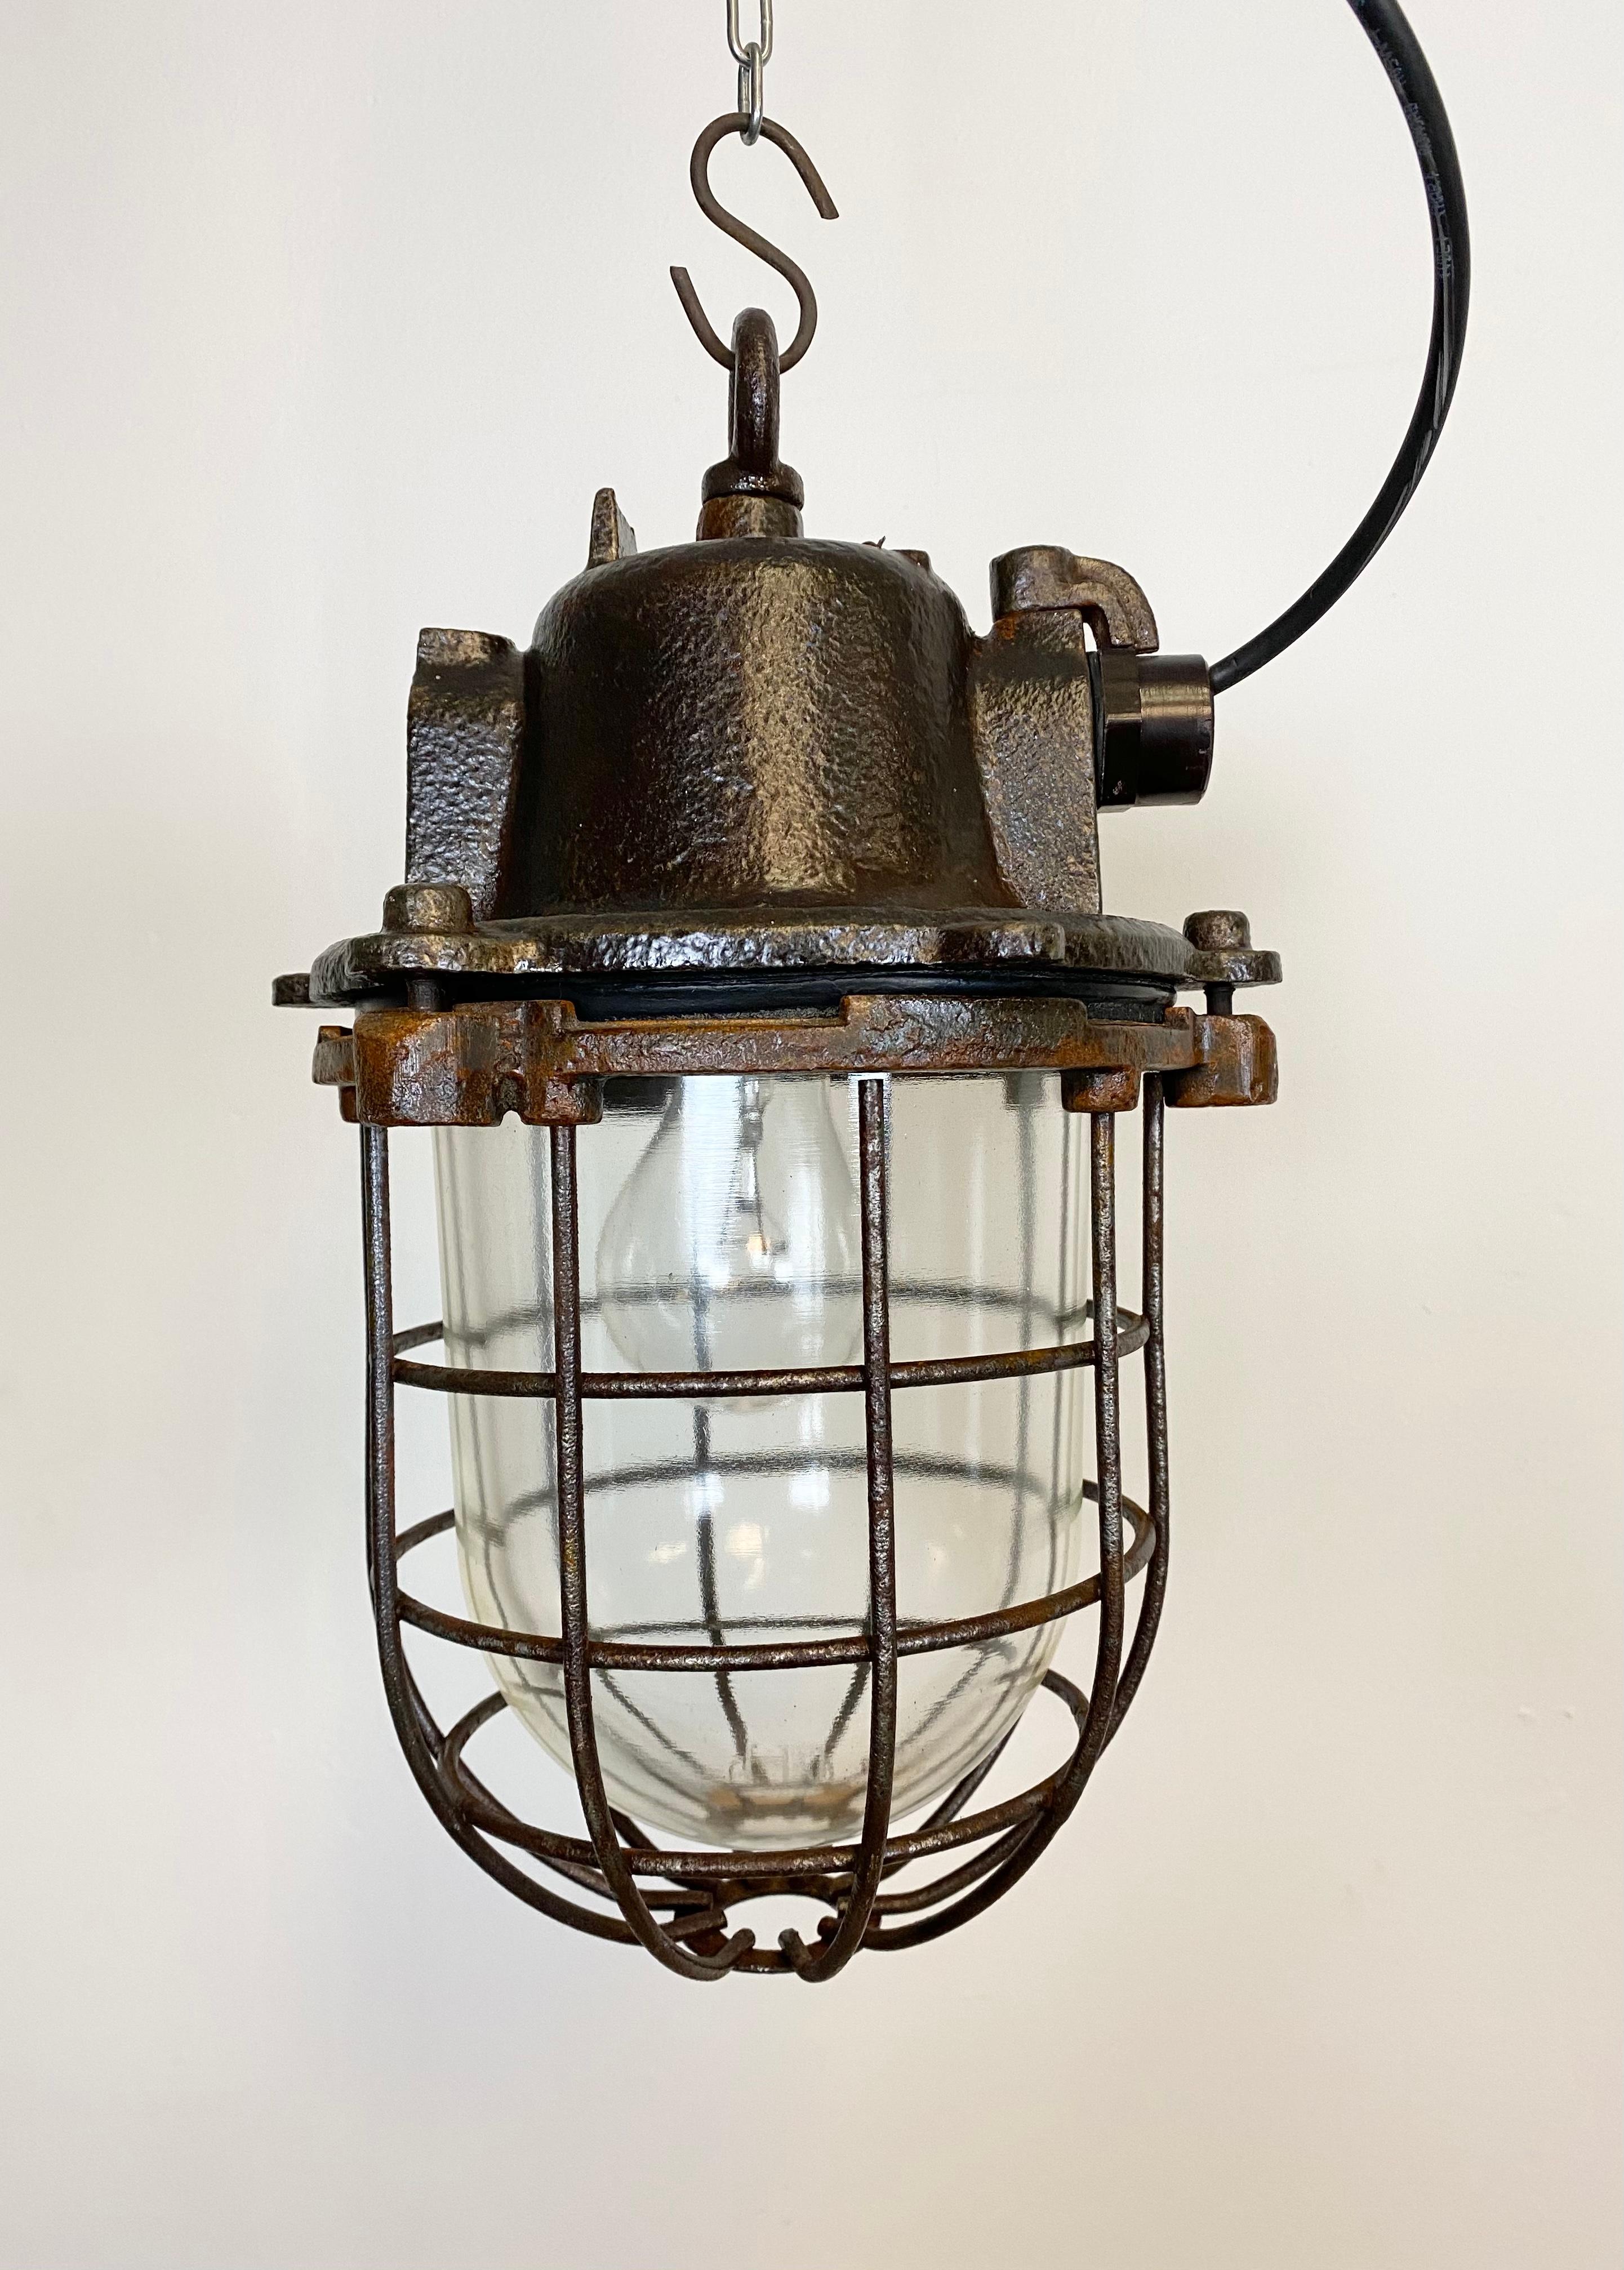 Industrial hanging lamp made in former Czechoslovakia during the 1960s. It features cast iron top, clear glass cover and iron grid. Porcelain socket for E 27 lightbulbs and new wire. The weight of the lamp is 9 kg.